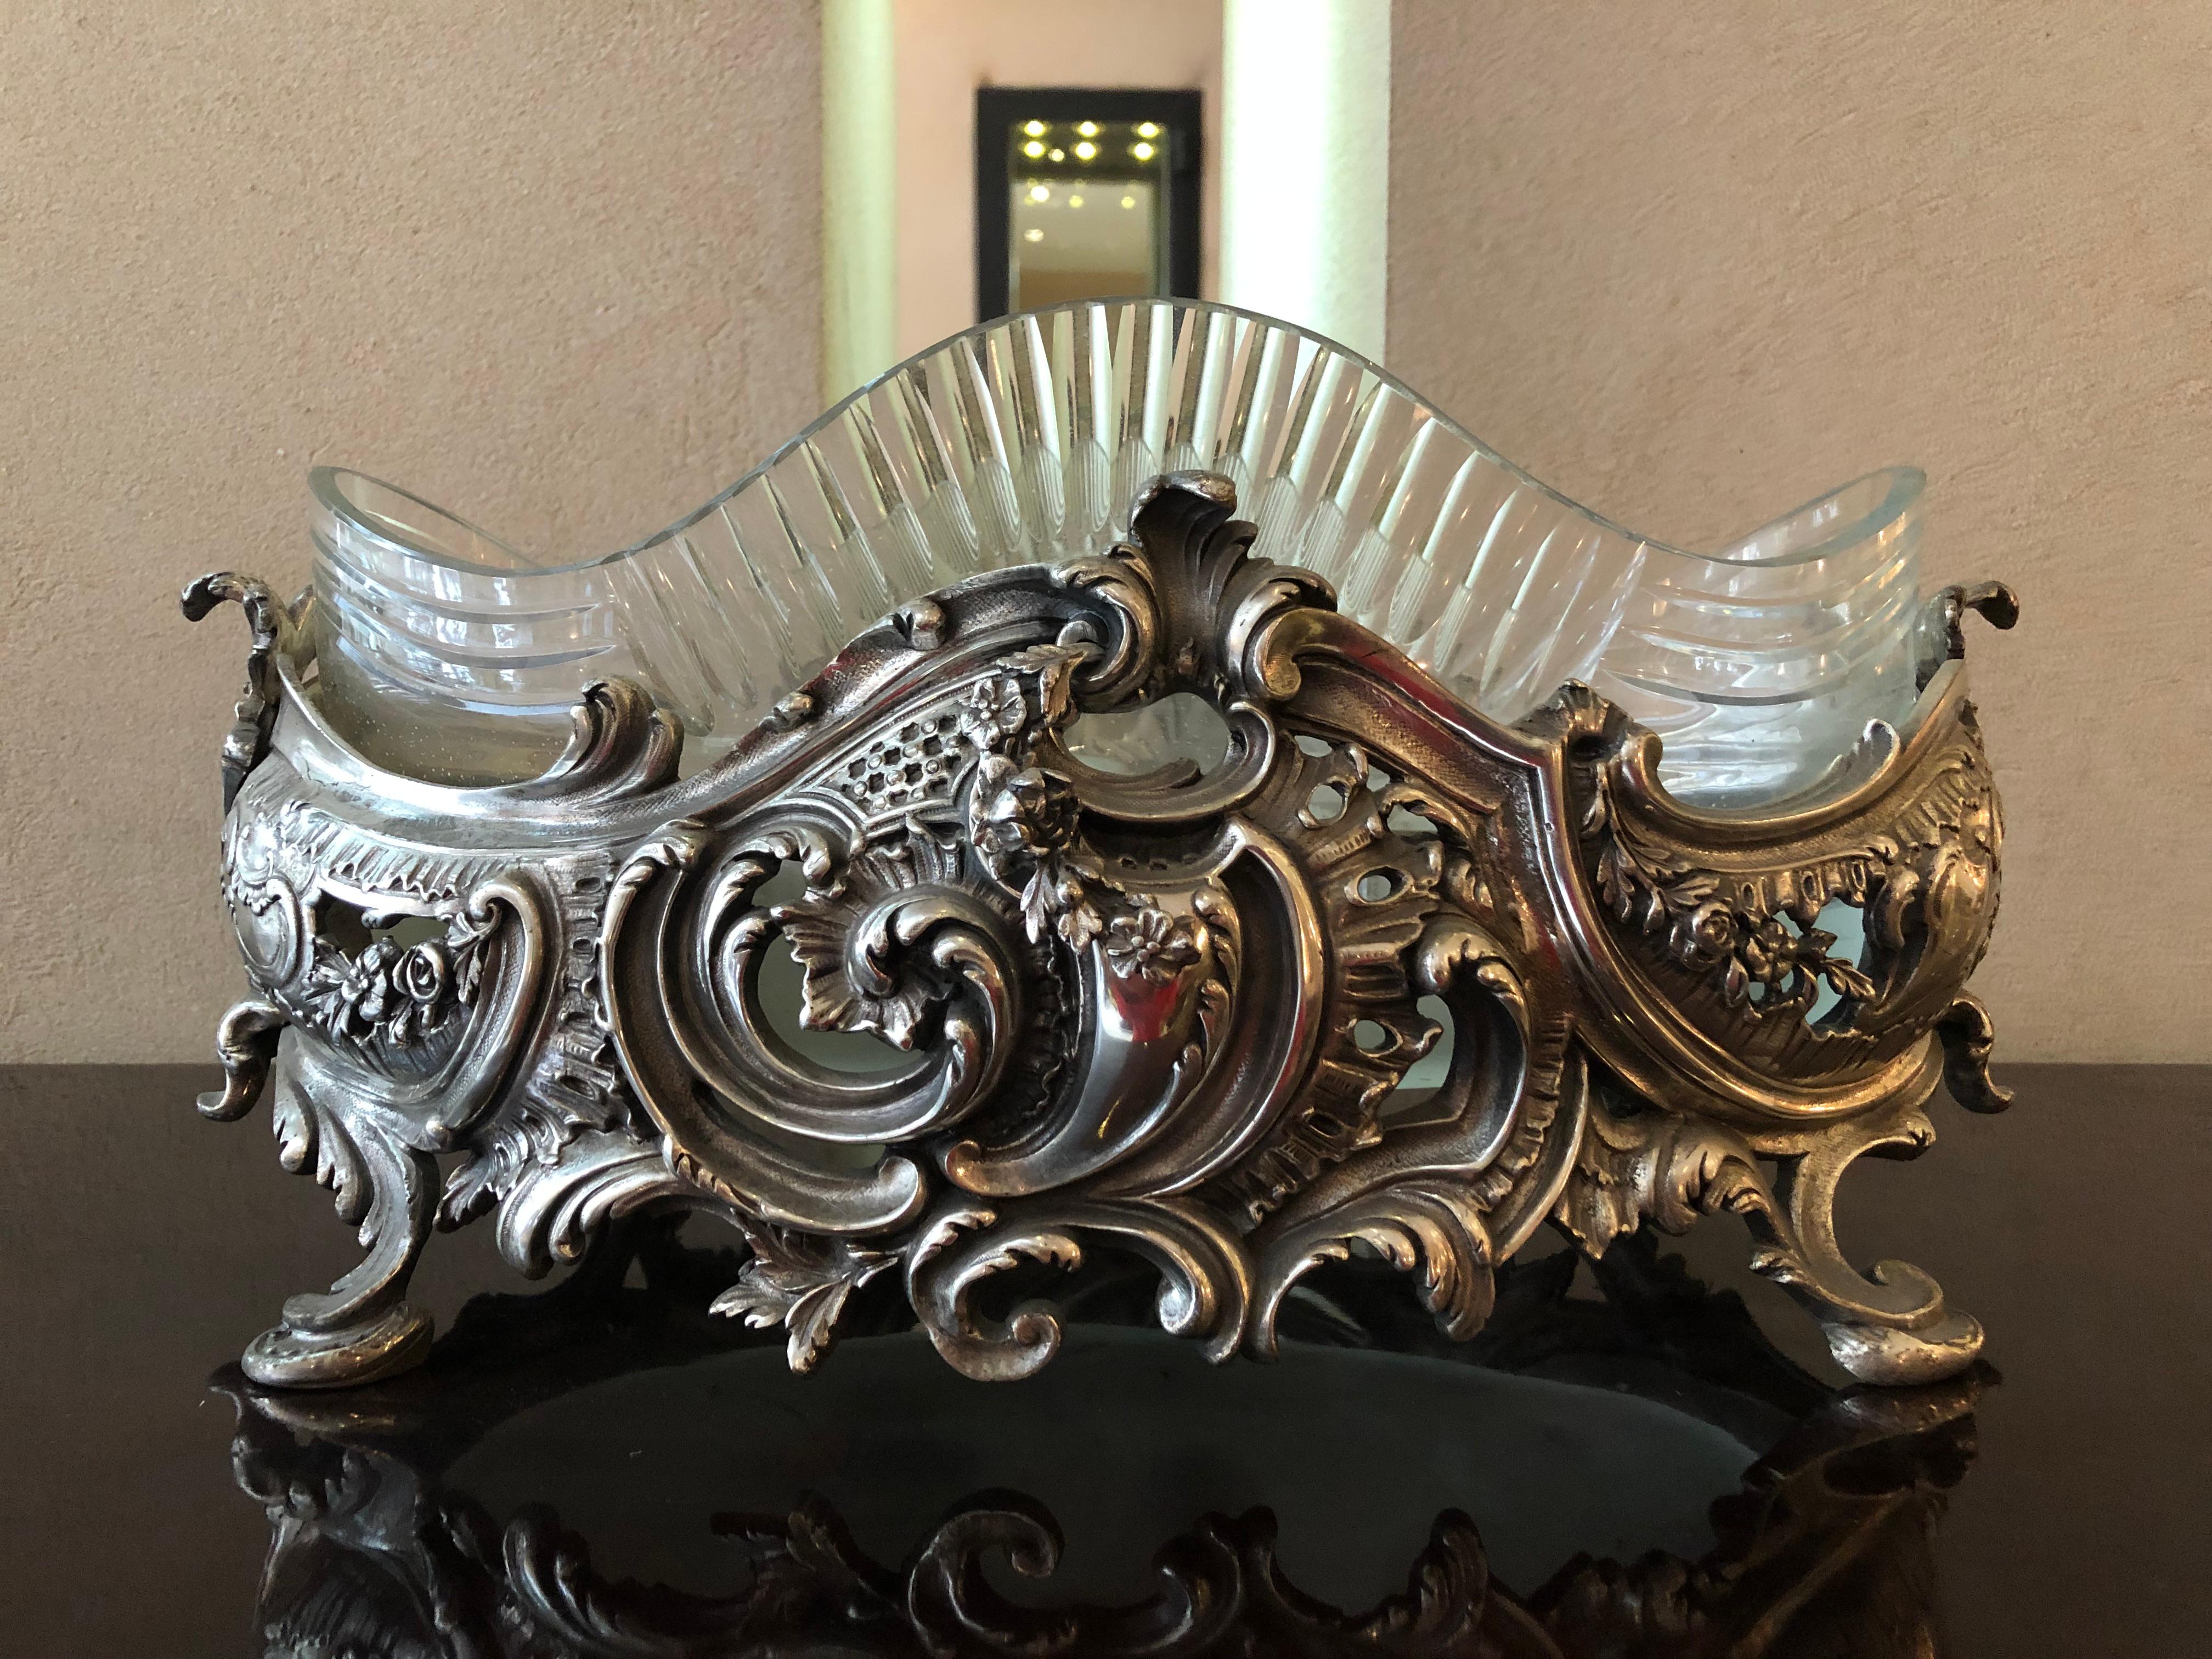 Centerplace
In silver plated bronze
We have specialized in the sale of Art Deco and Art Nouveau and Vintage styles since 1982. If you have any questions we are at your disposal.
Pushing the button that reads 'View All From Seller'. And you can see